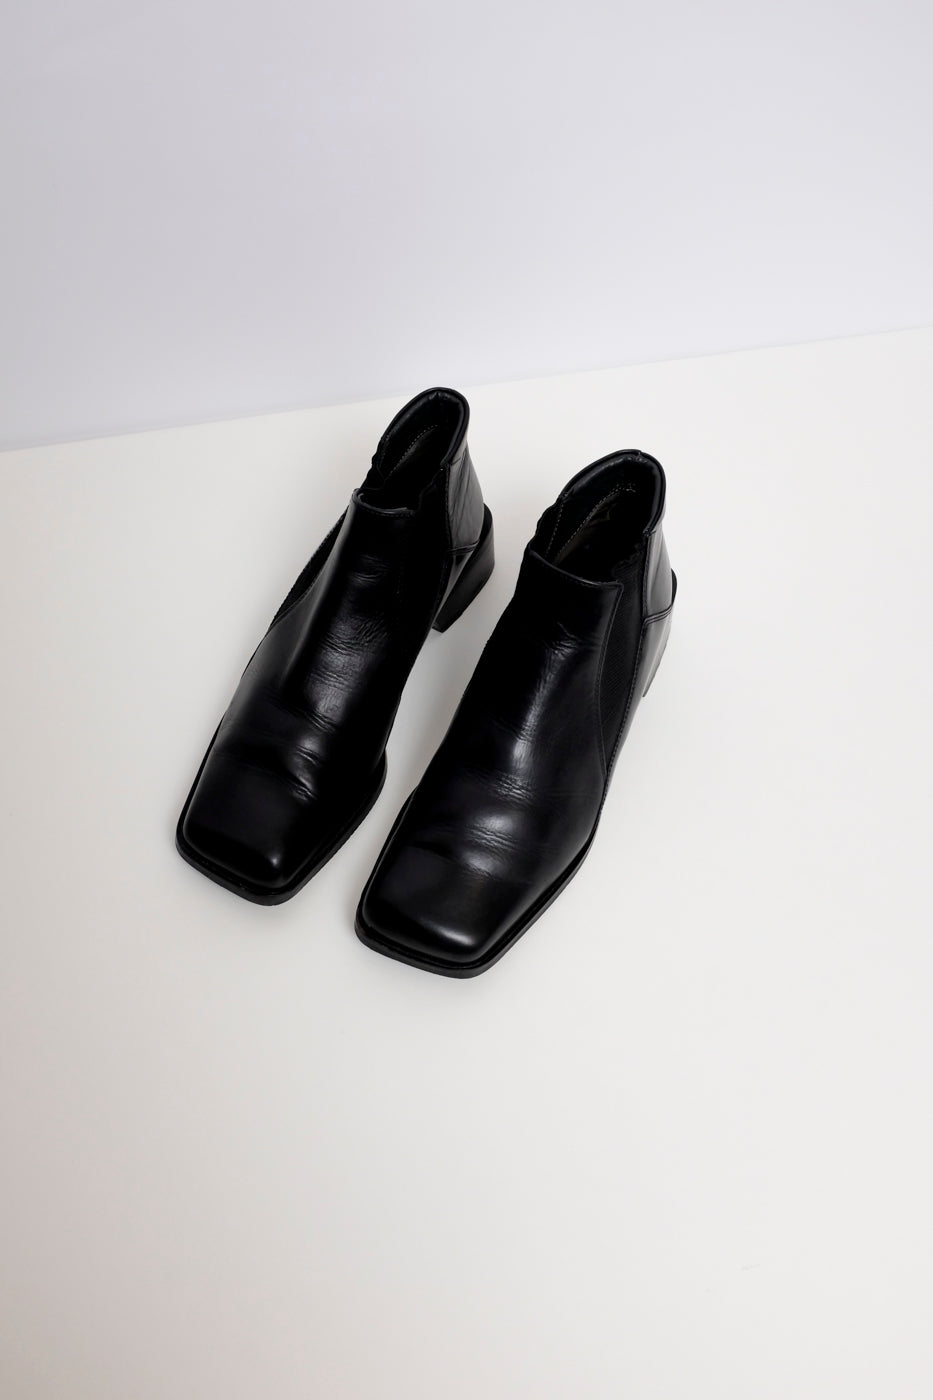 0010_SQUARE TOE BLACK 37 LEATHER CHELSEA BOOTS